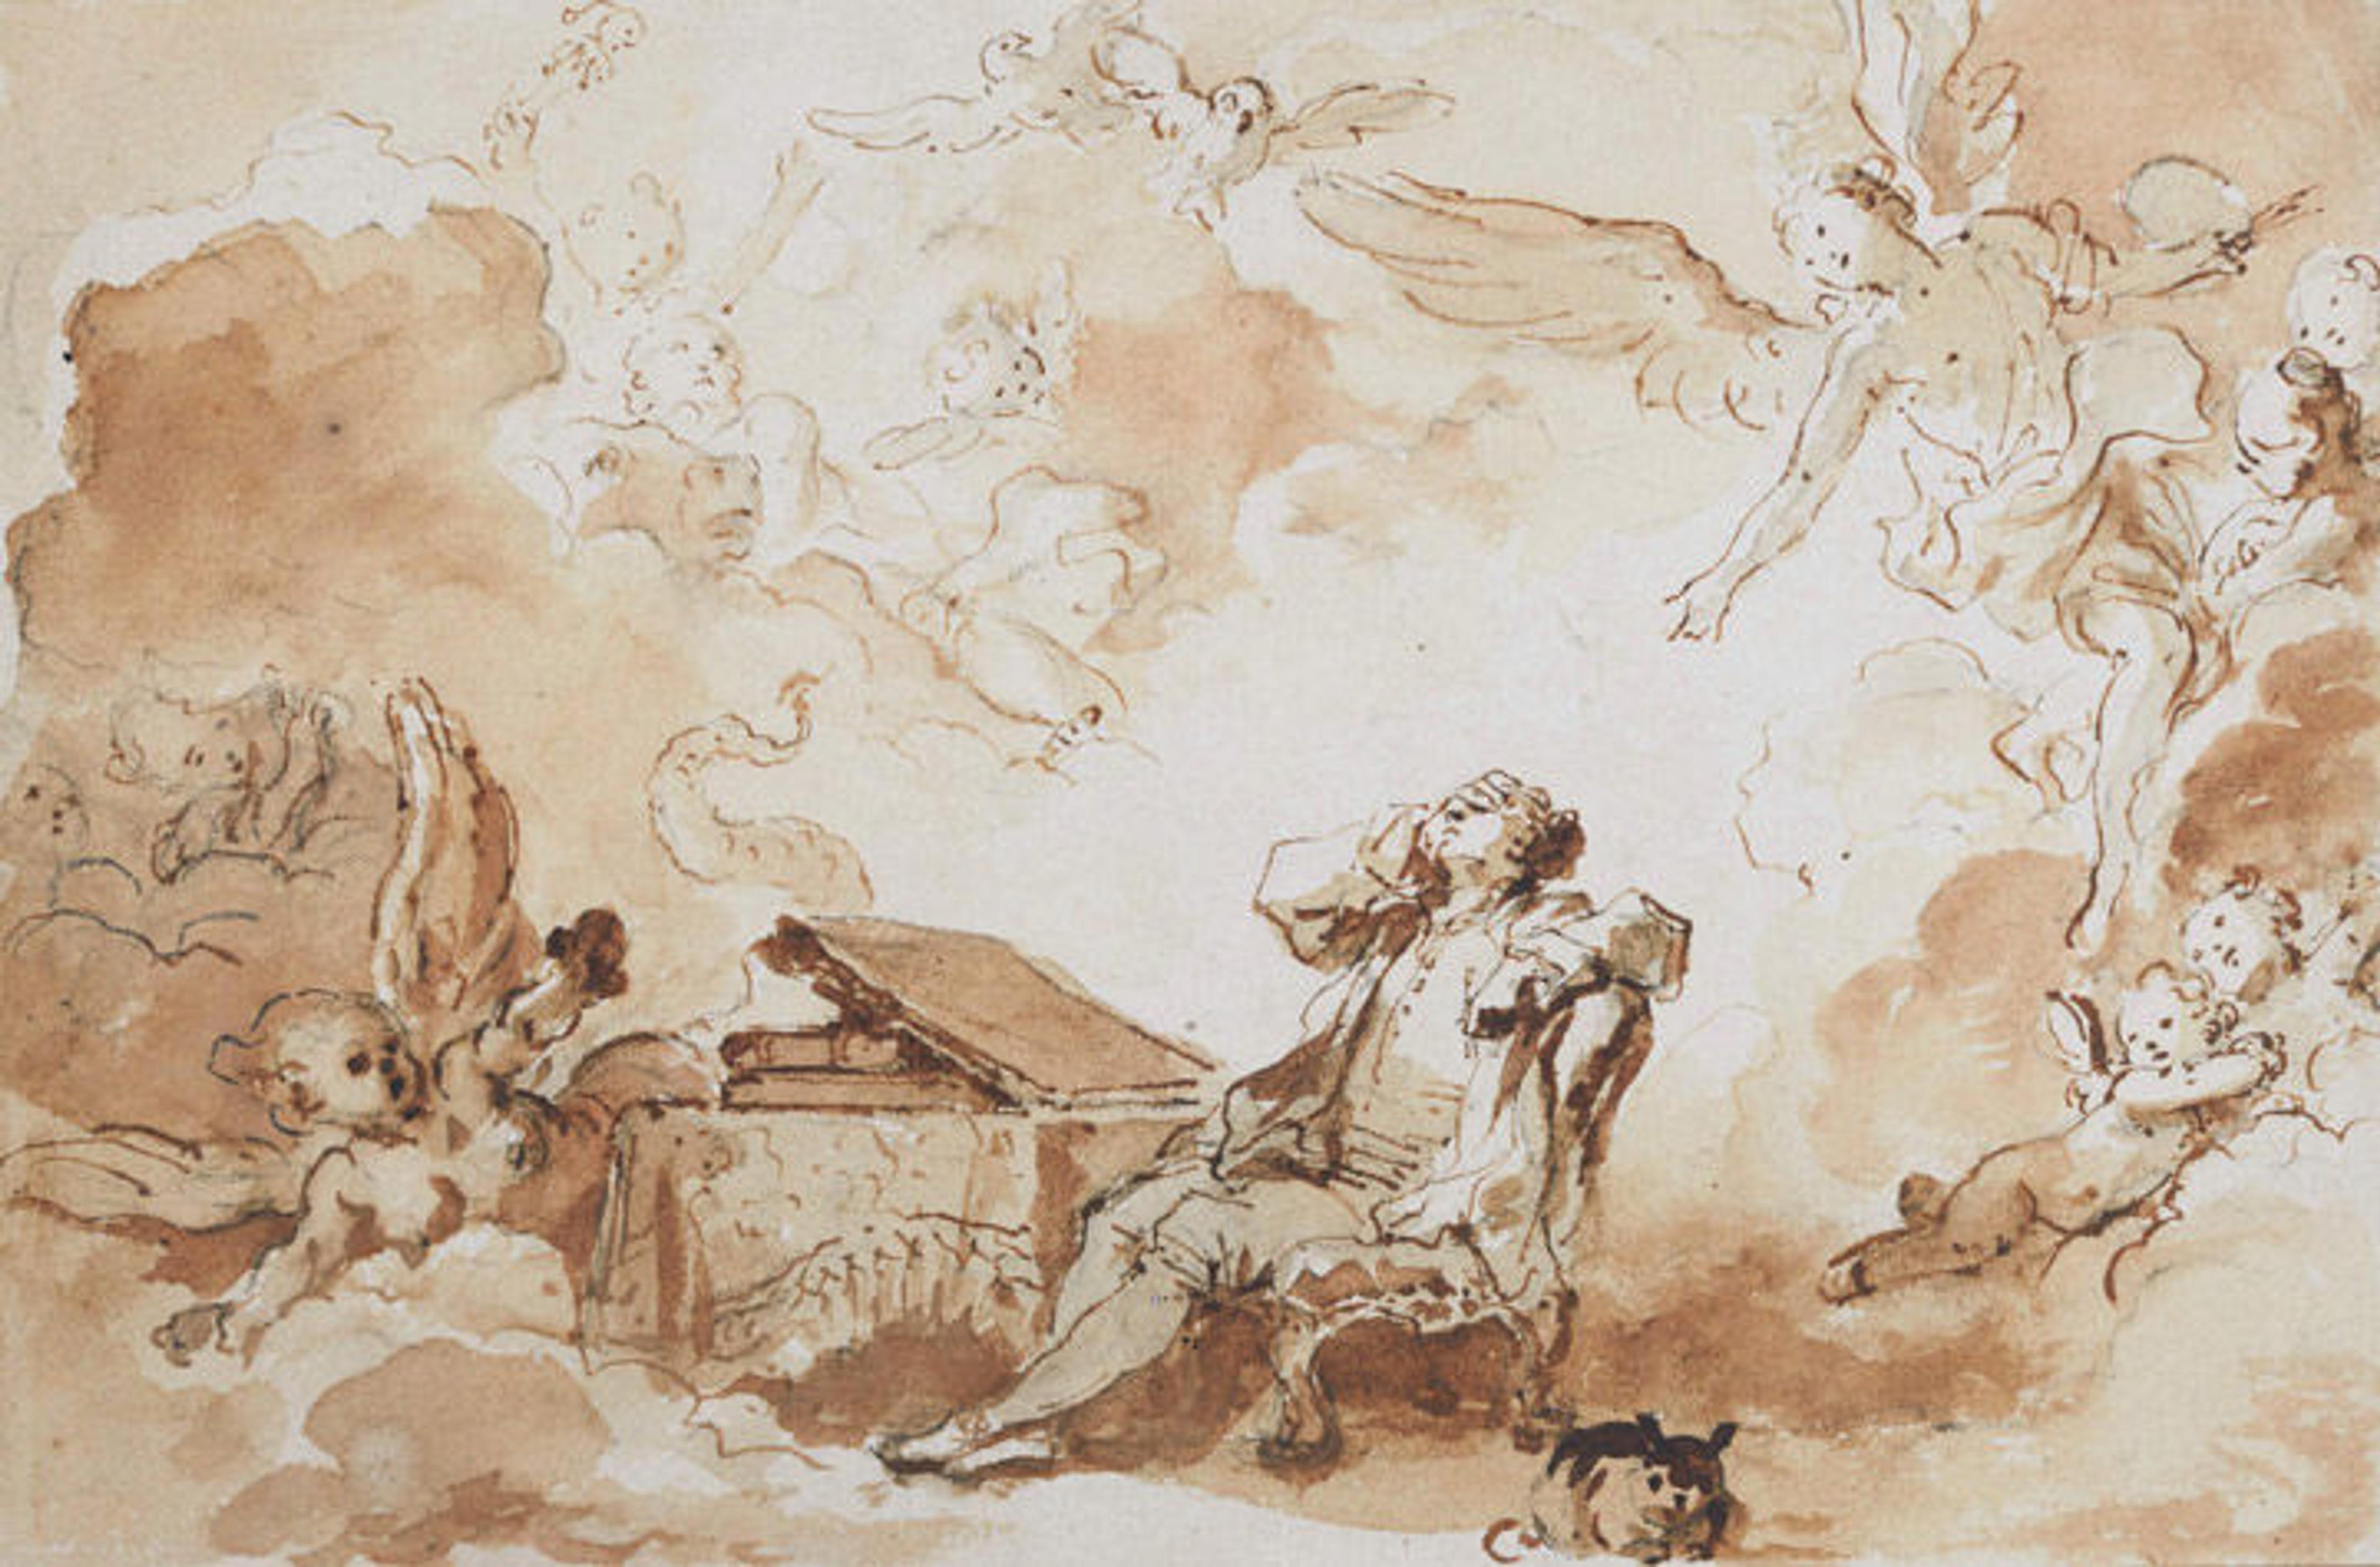 Ink and wash drawing of a man in 18th-century dress sitting at a desk and surrounded by figments of his imagination